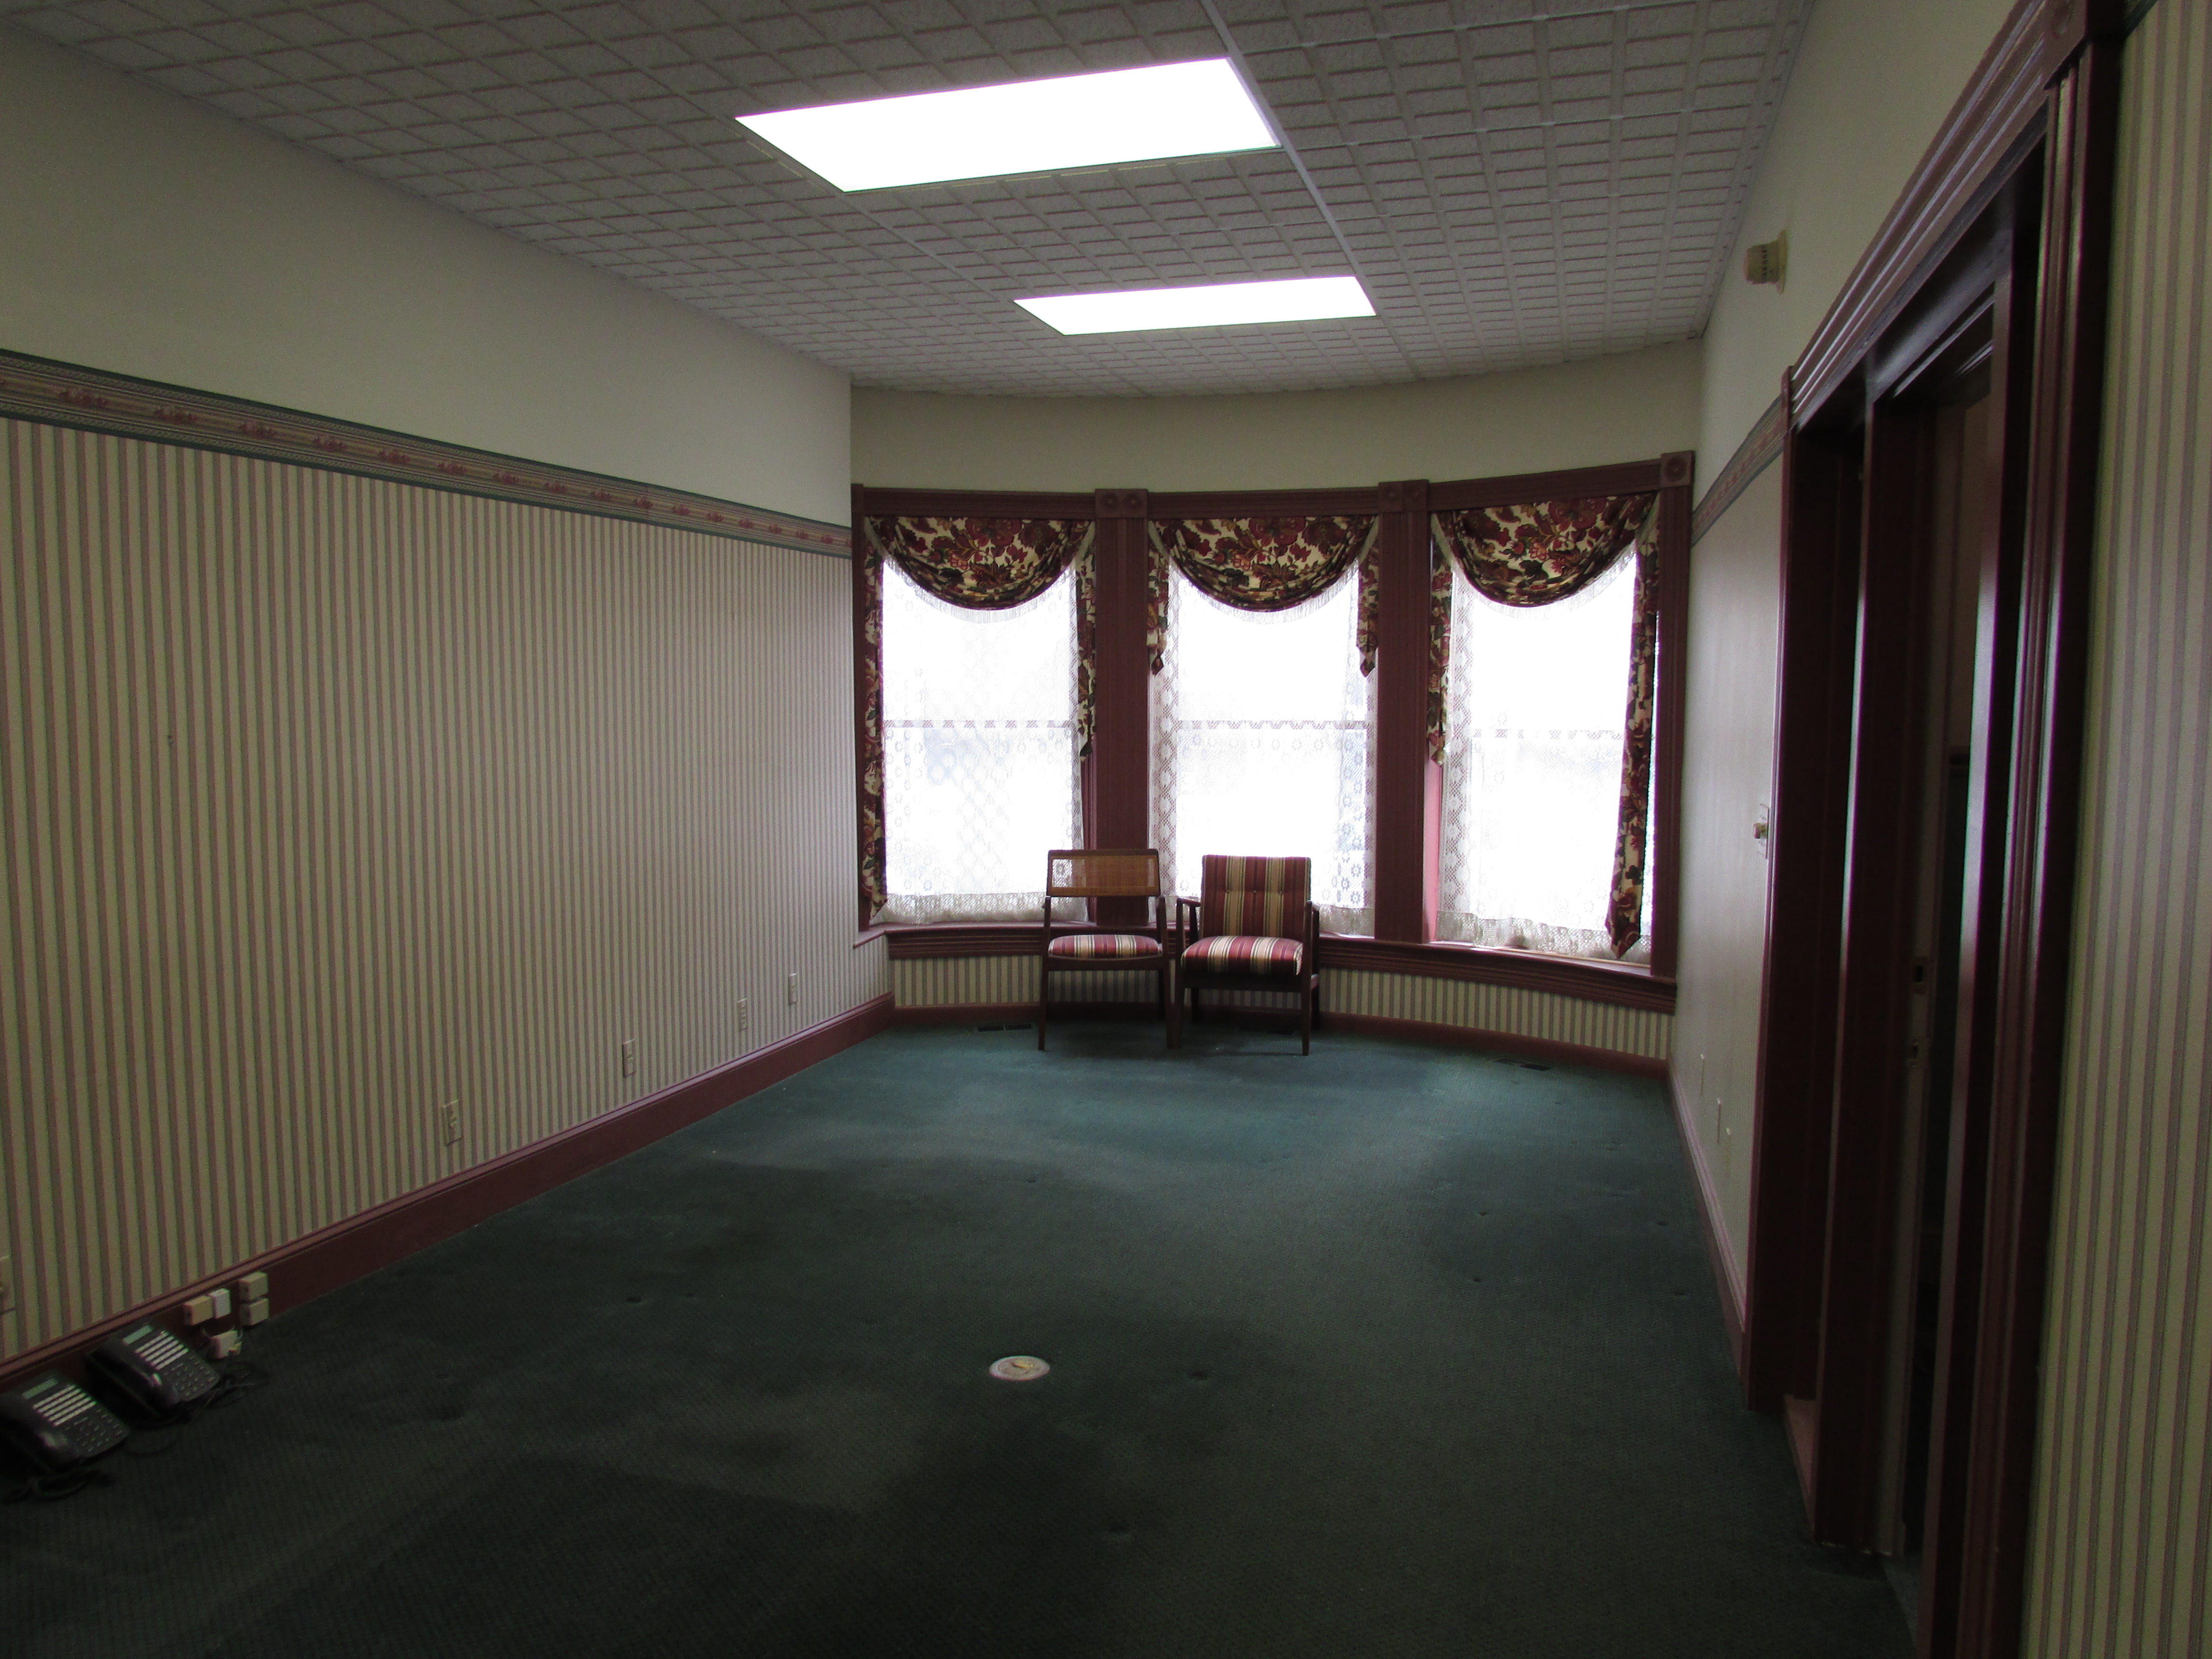 182 E. Main St.,Westminster,Maryland 21157,12 Rooms Rooms,4 BathroomsBathrooms,Office,E. Main St.,1137